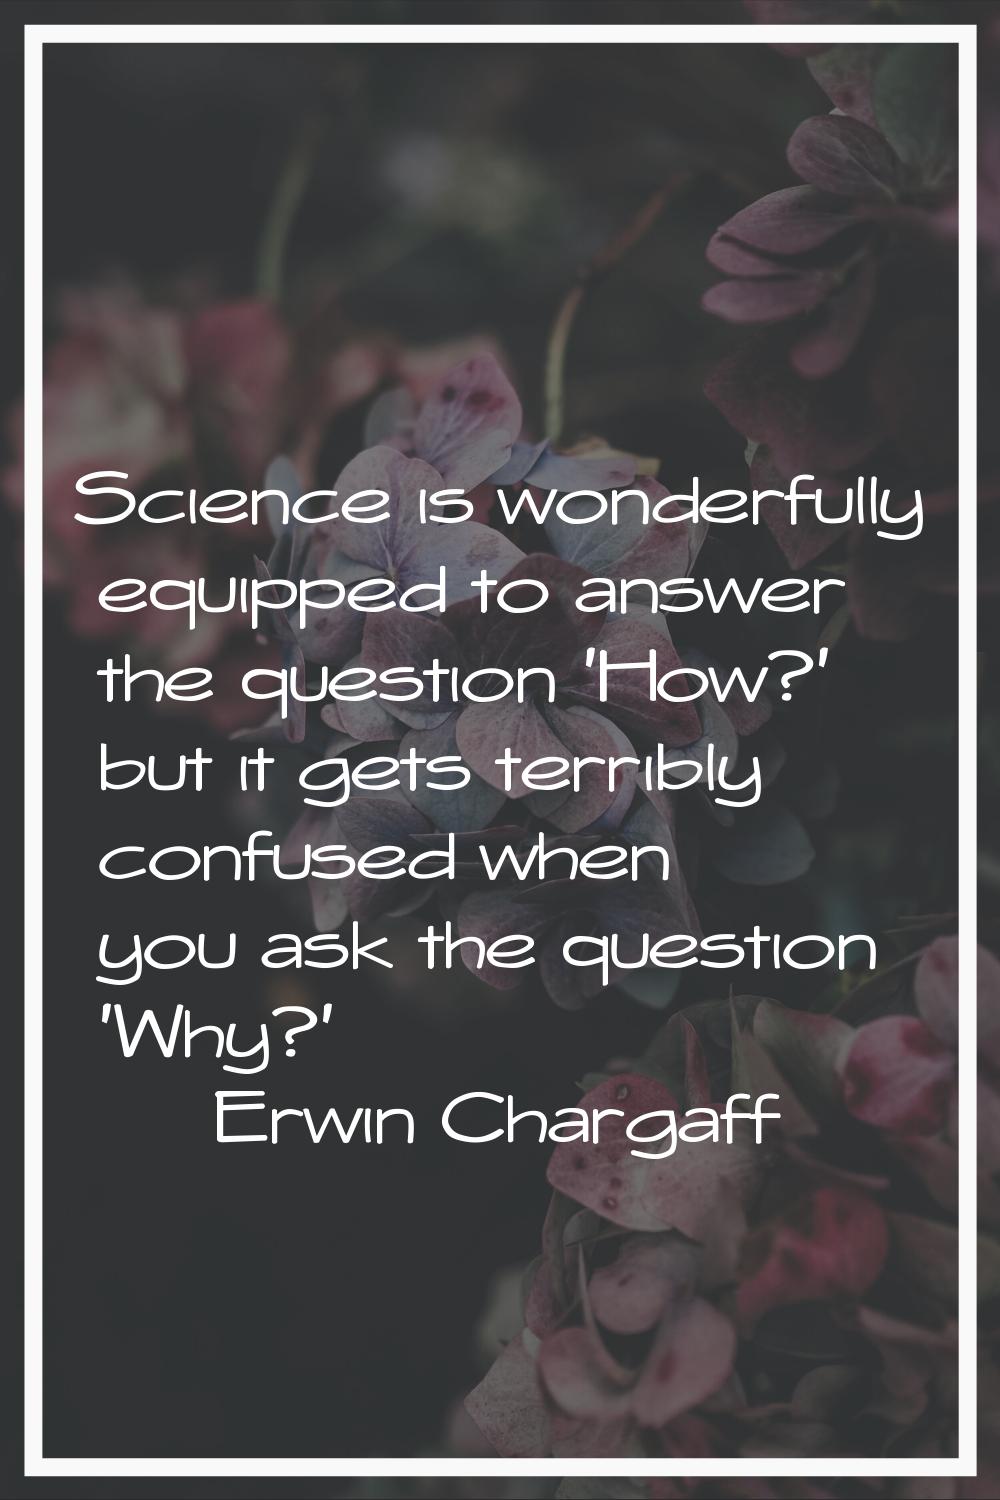 Science is wonderfully equipped to answer the question 'How?' but it gets terribly confused when yo